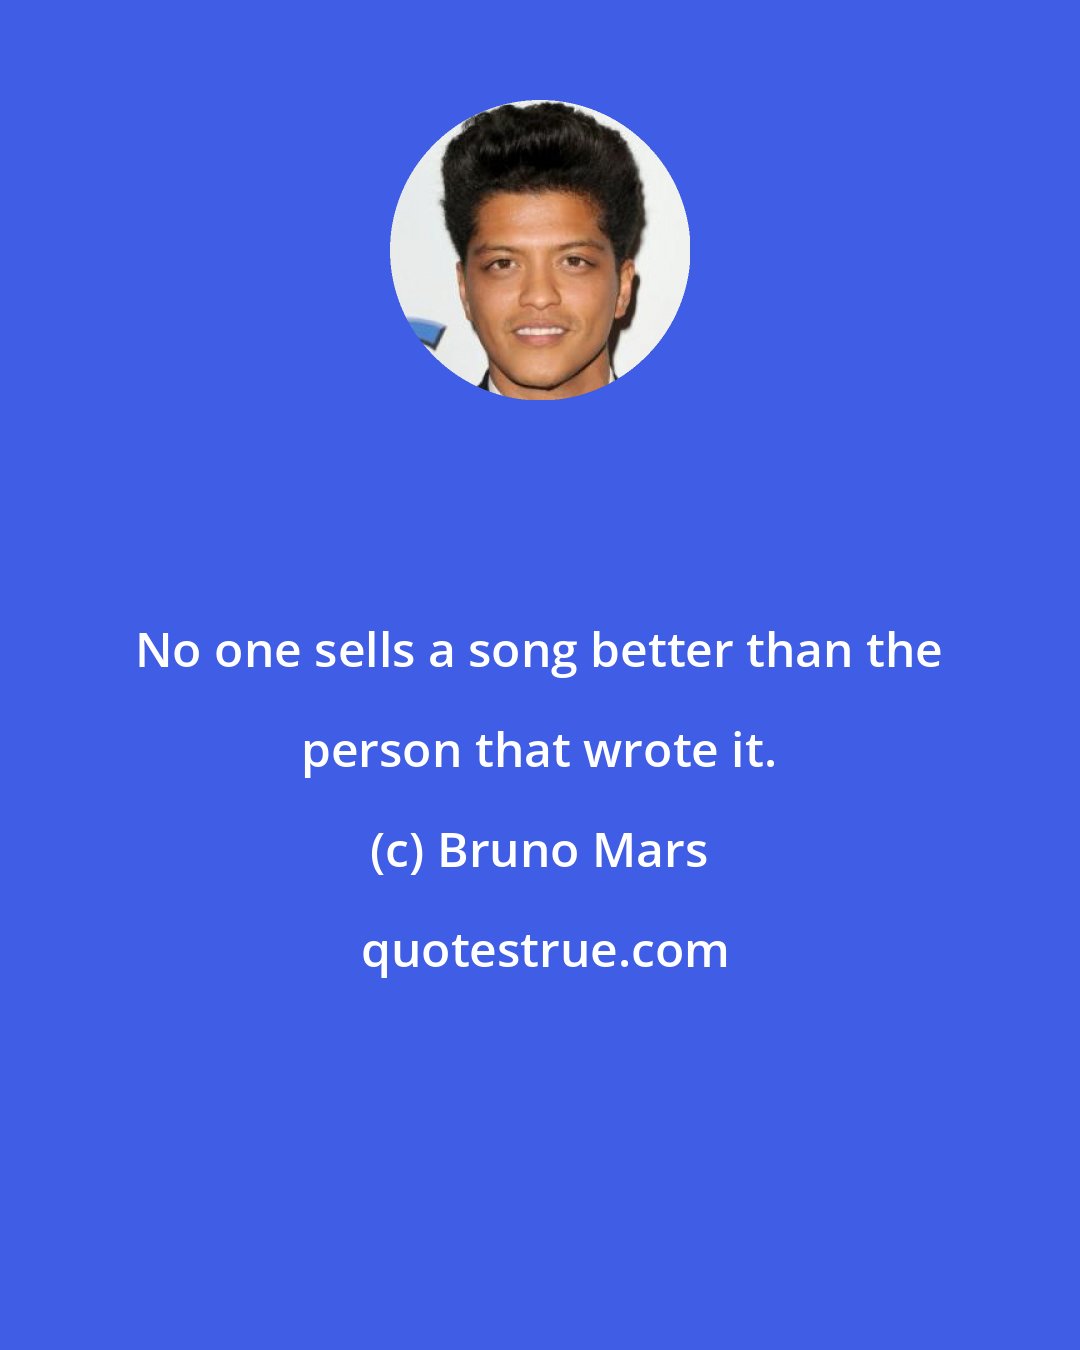 Bruno Mars: No one sells a song better than the person that wrote it.